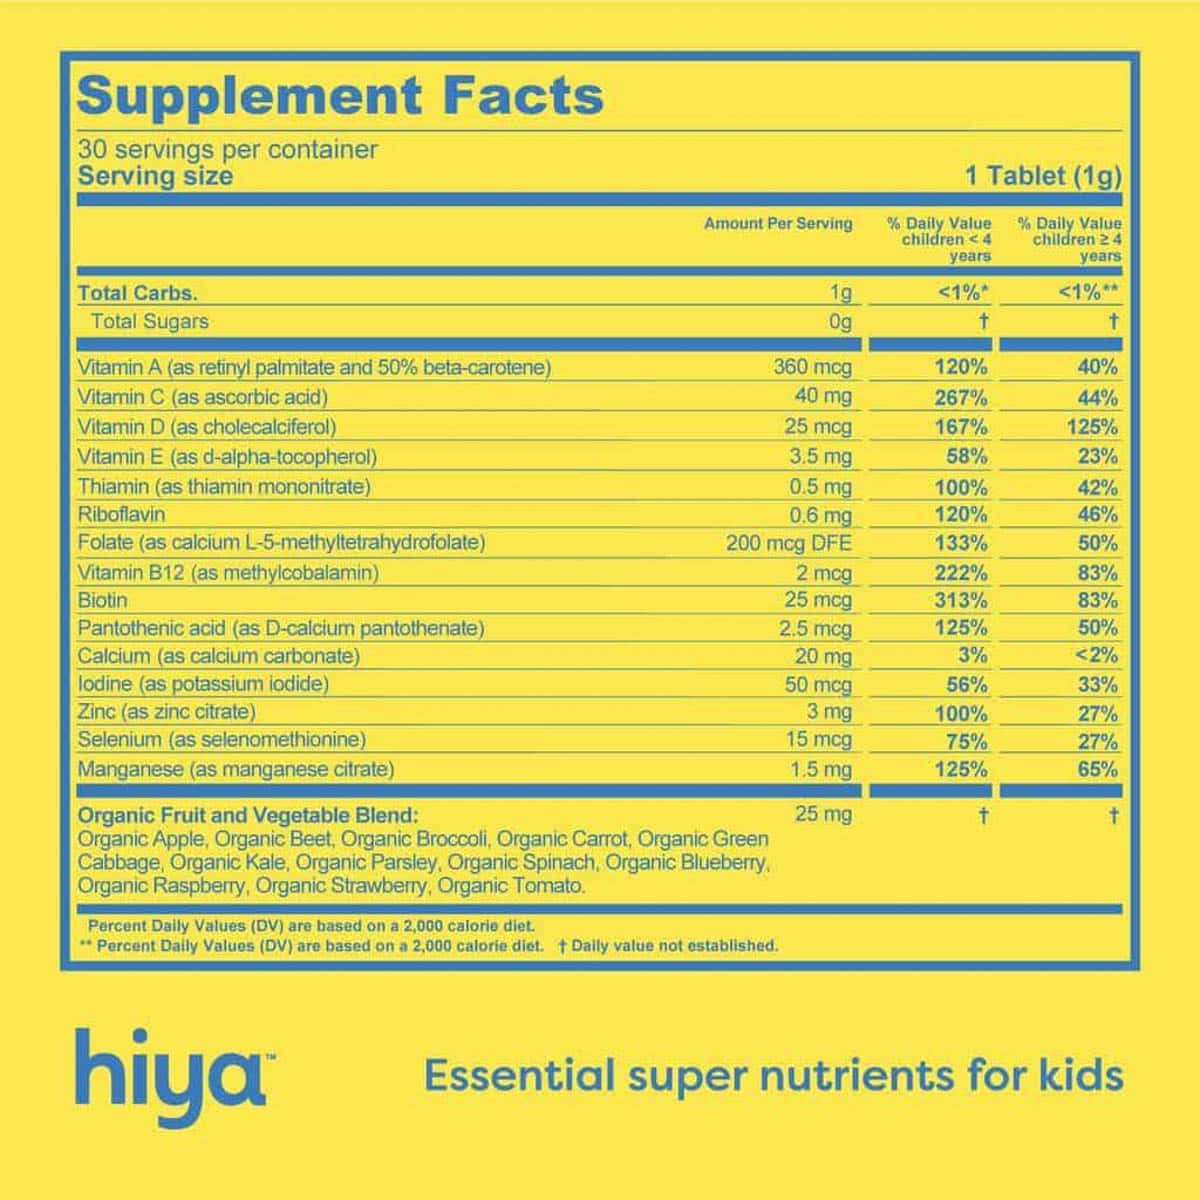 The nutritional info label for Hiya vitamins.